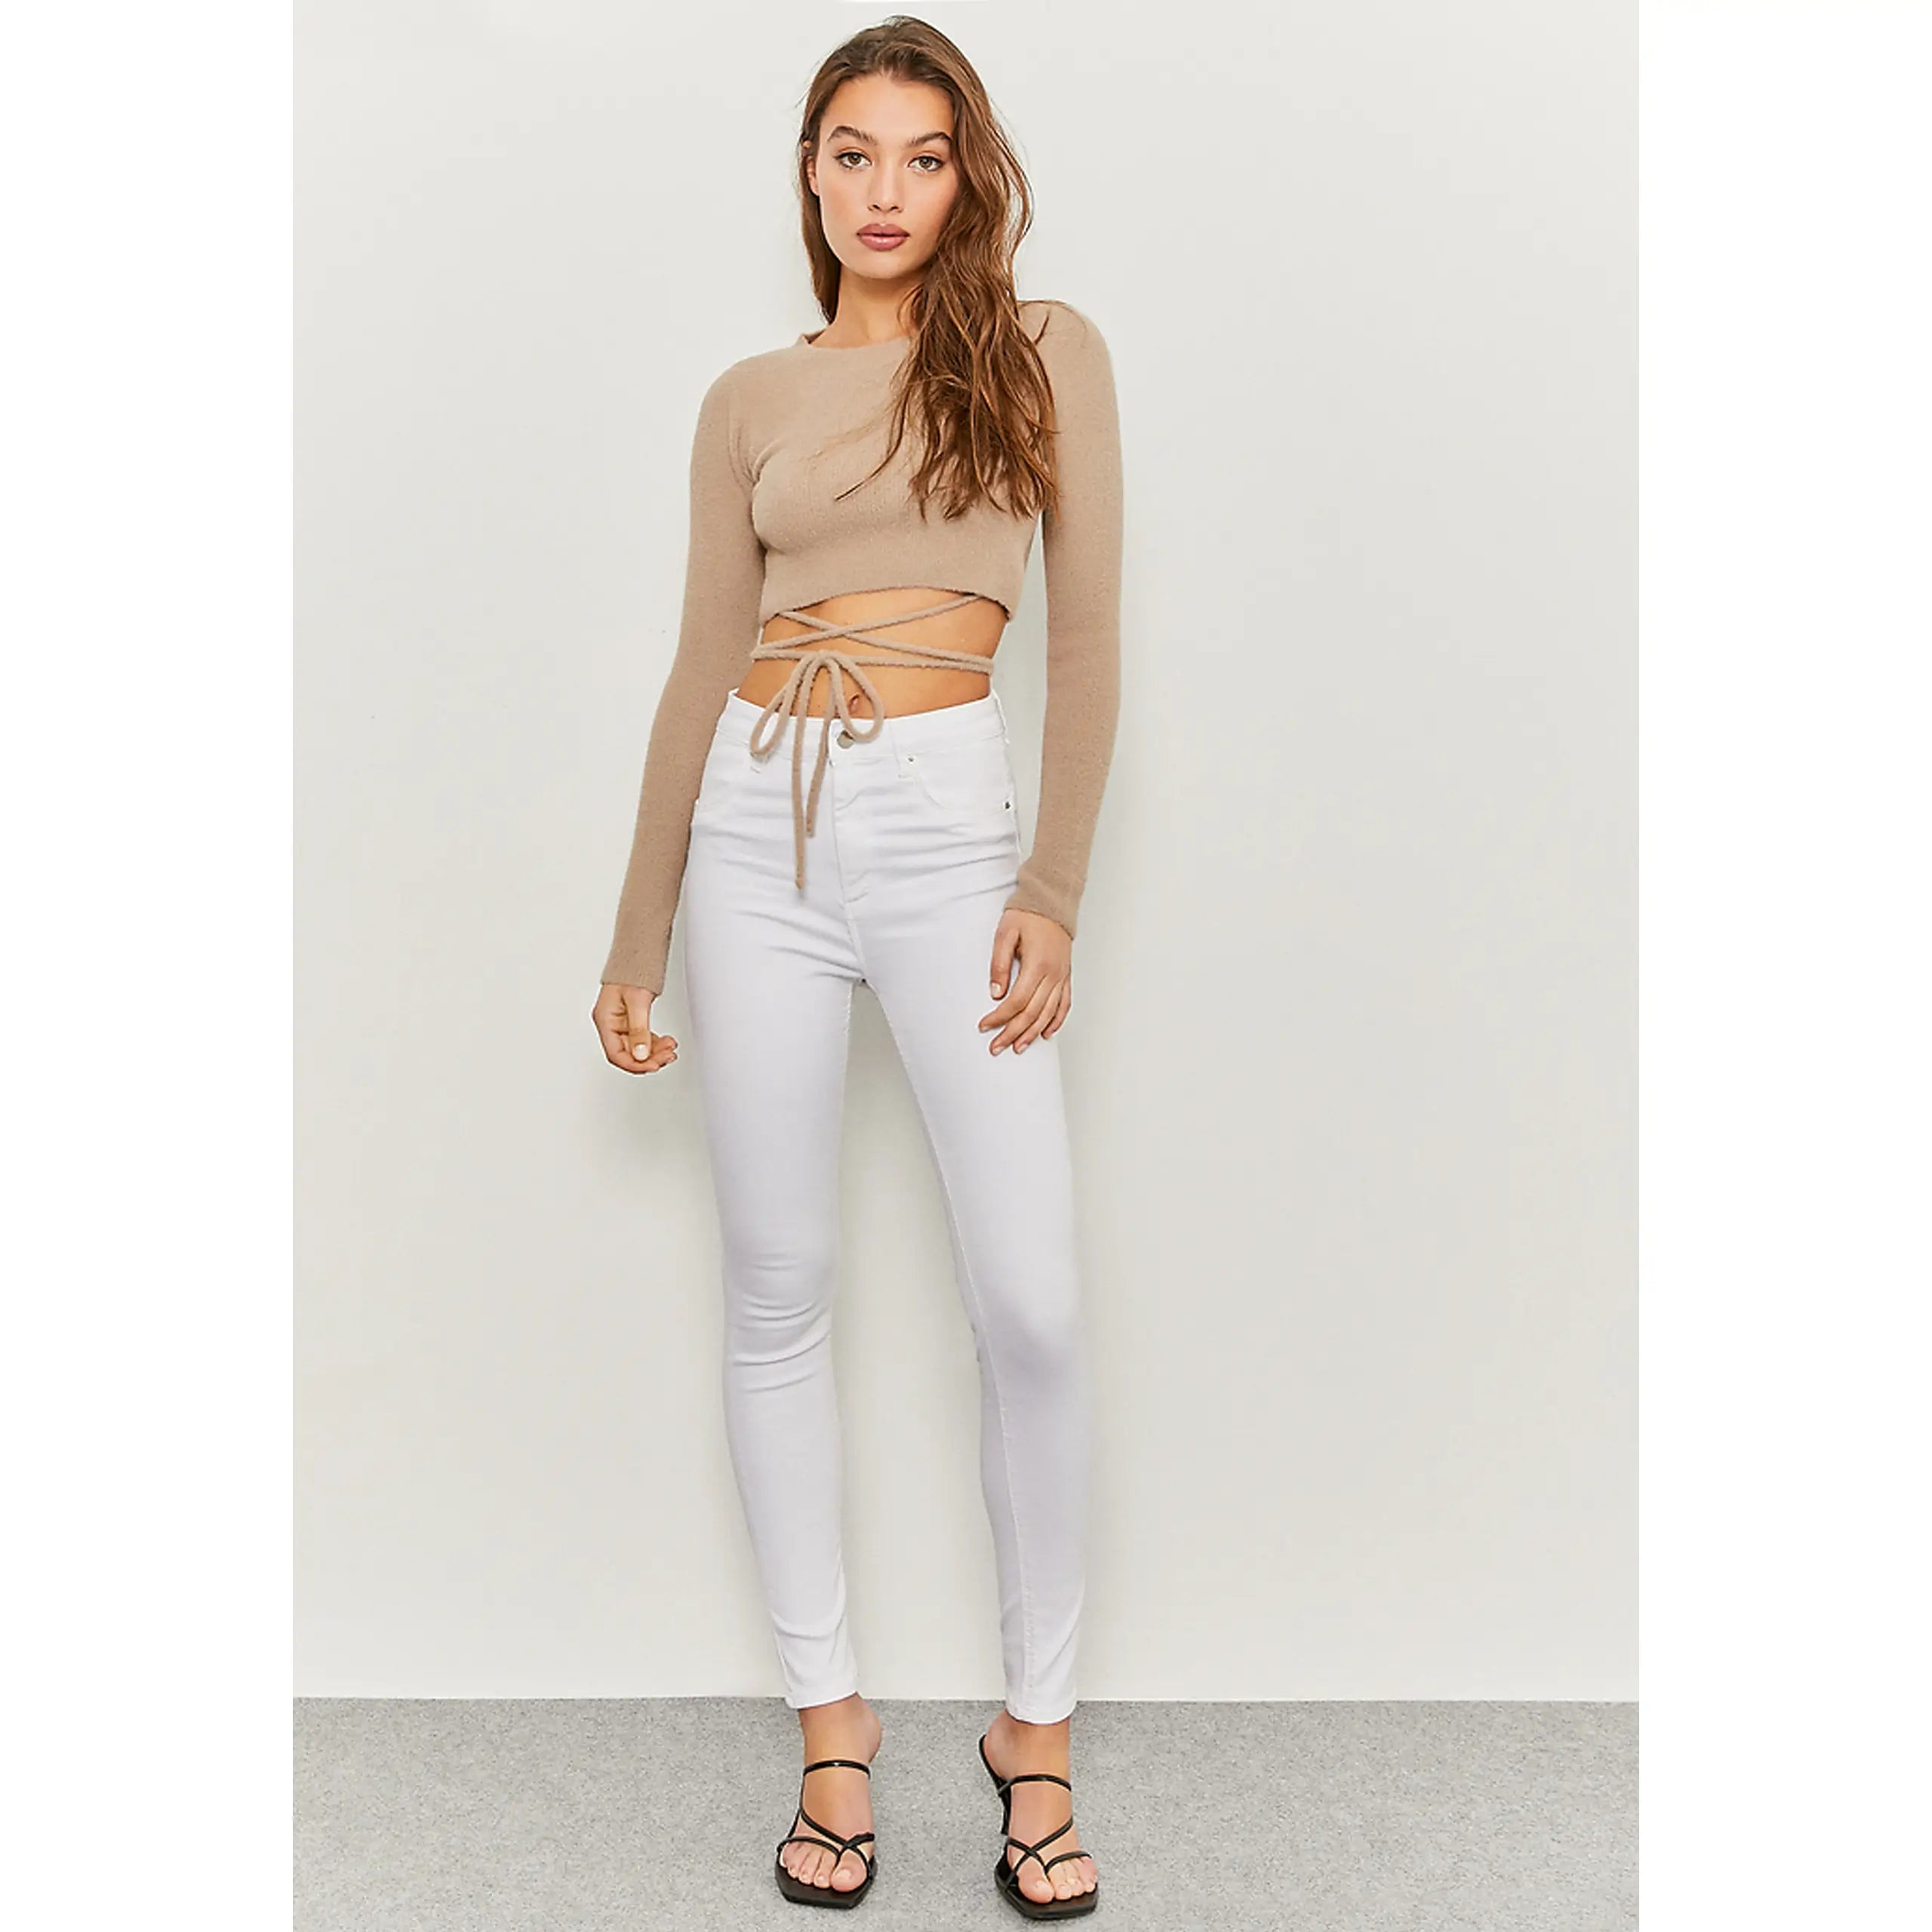 White Skinny Jeans - lessthan1thousand